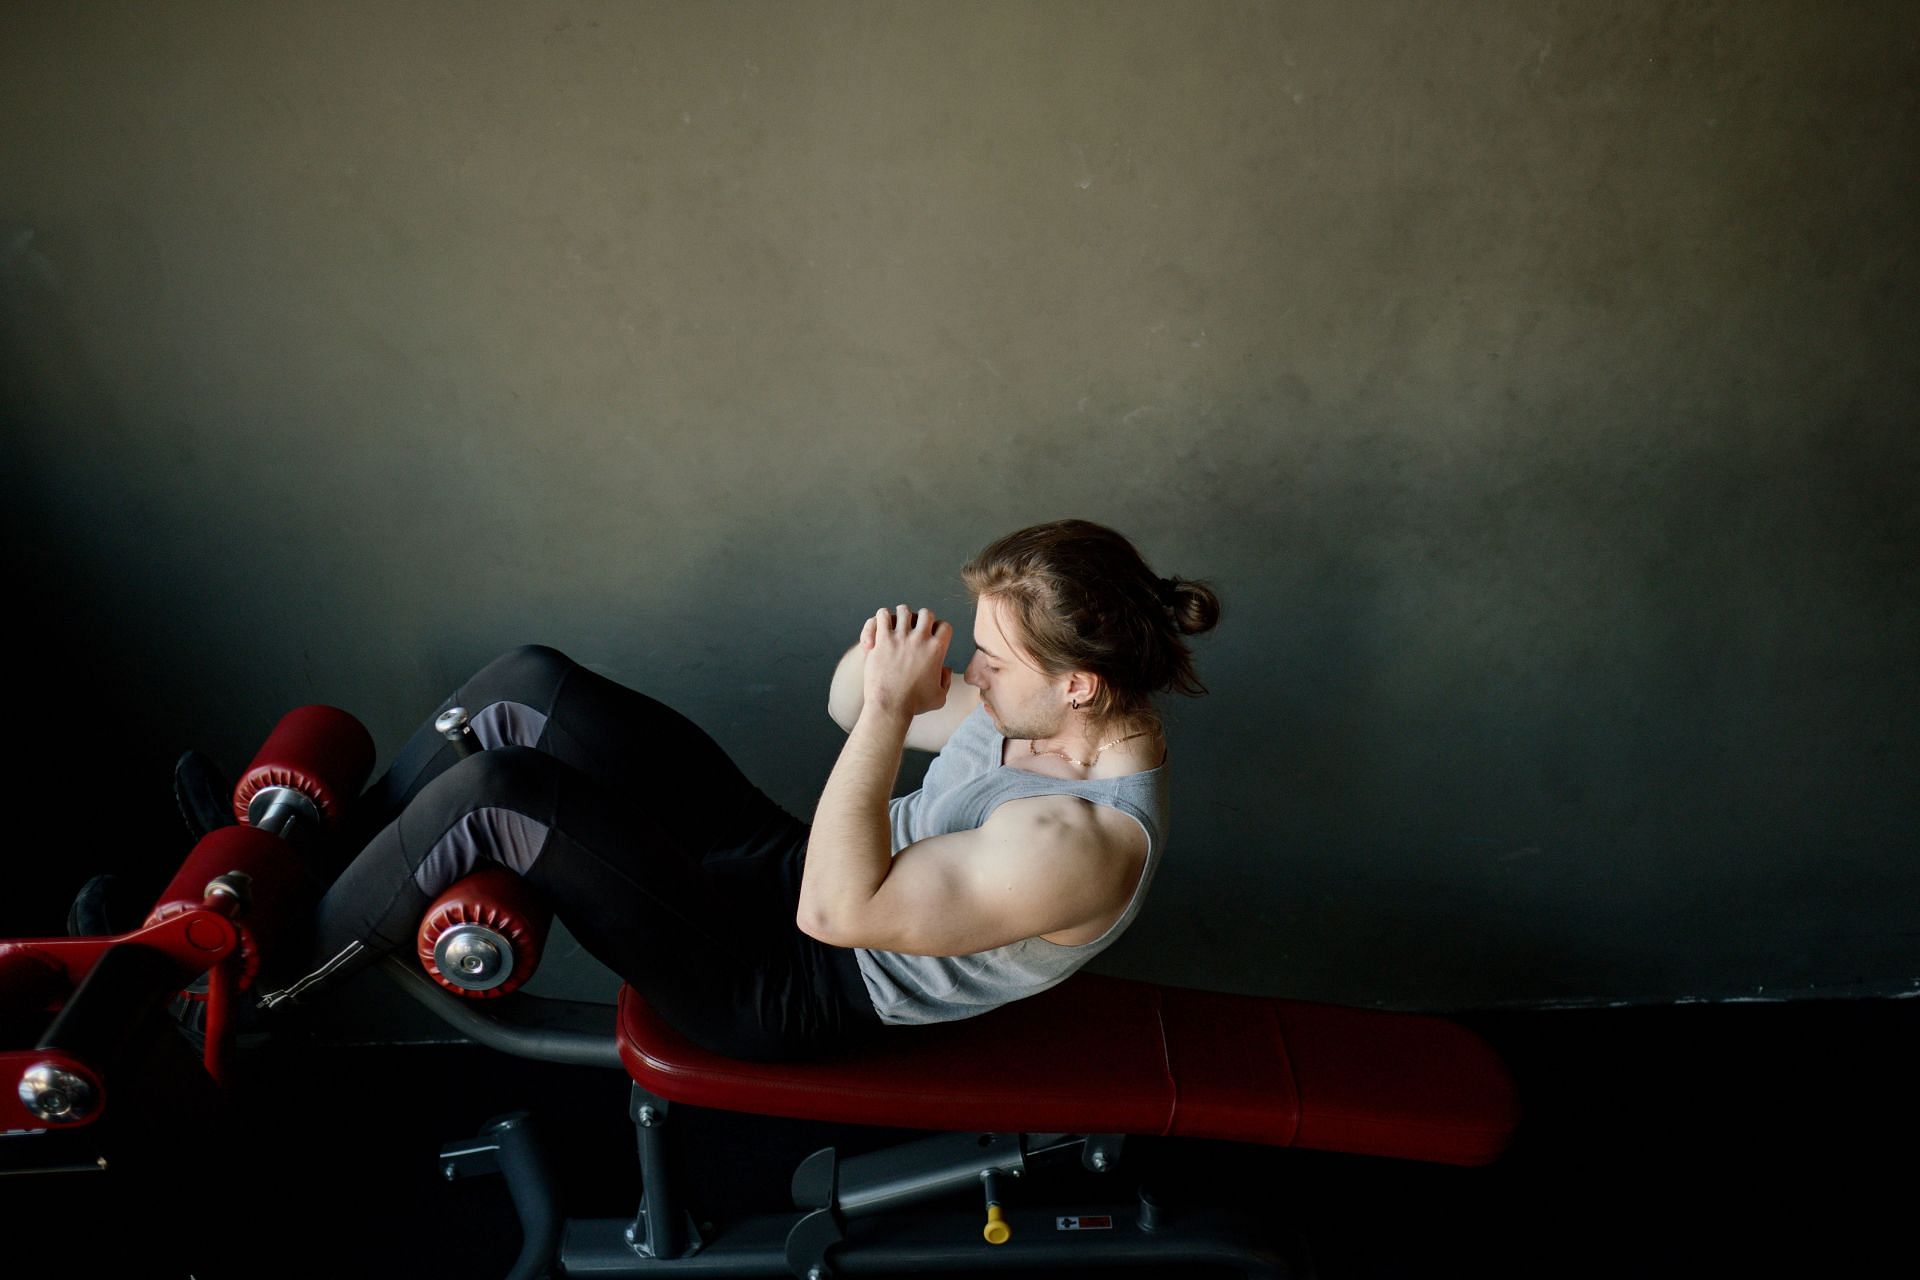 The ab bench is a specialized bench that is designed for core training exercises, such as sit-ups, leg raises, and more (Photo by Ivan Samkov/pexels)